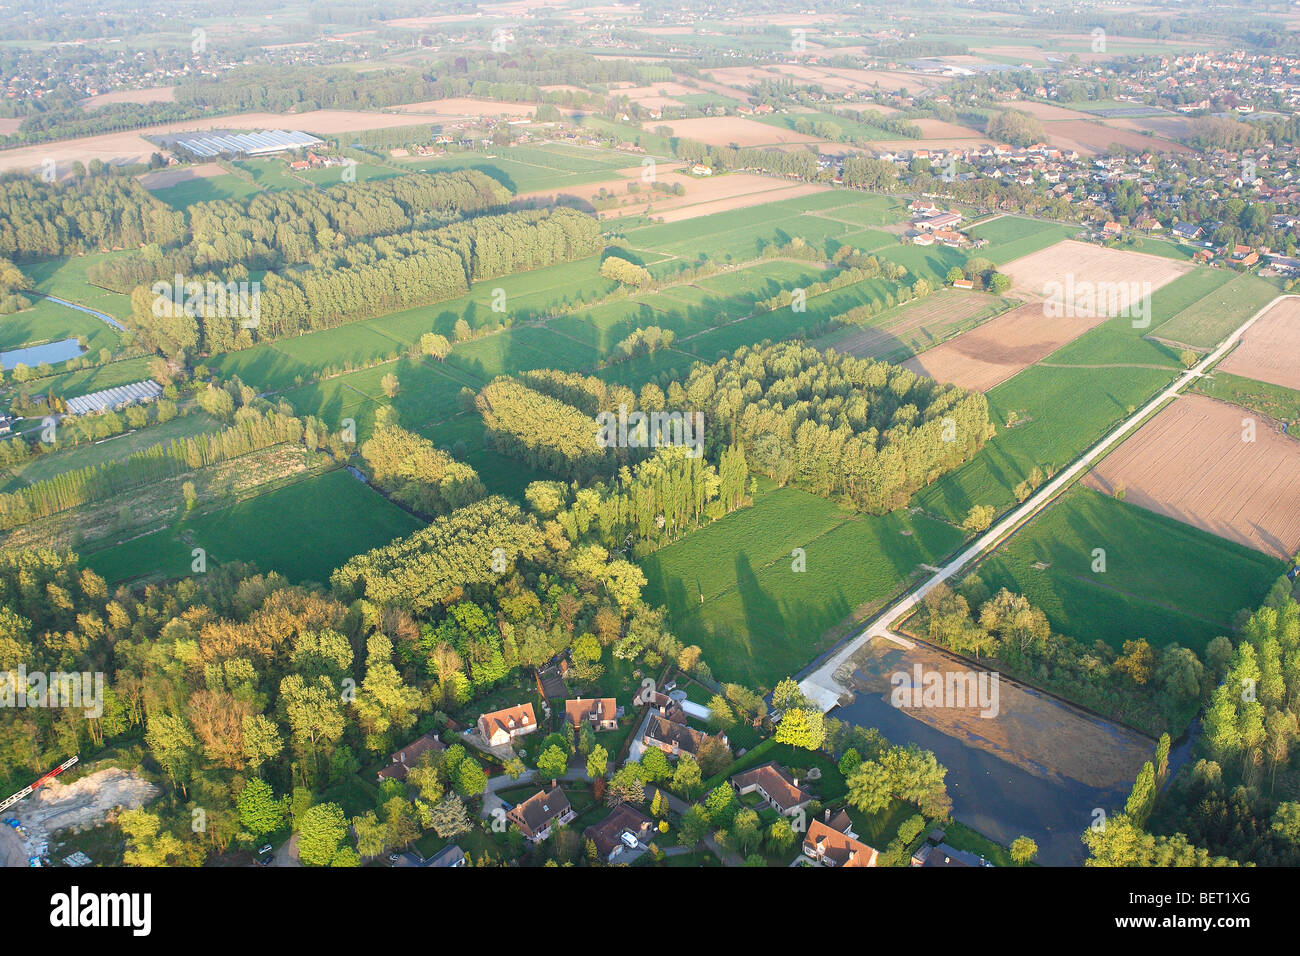 Castle, urbanisation at the border of agricultural area from the air, Belgium Stock Photo